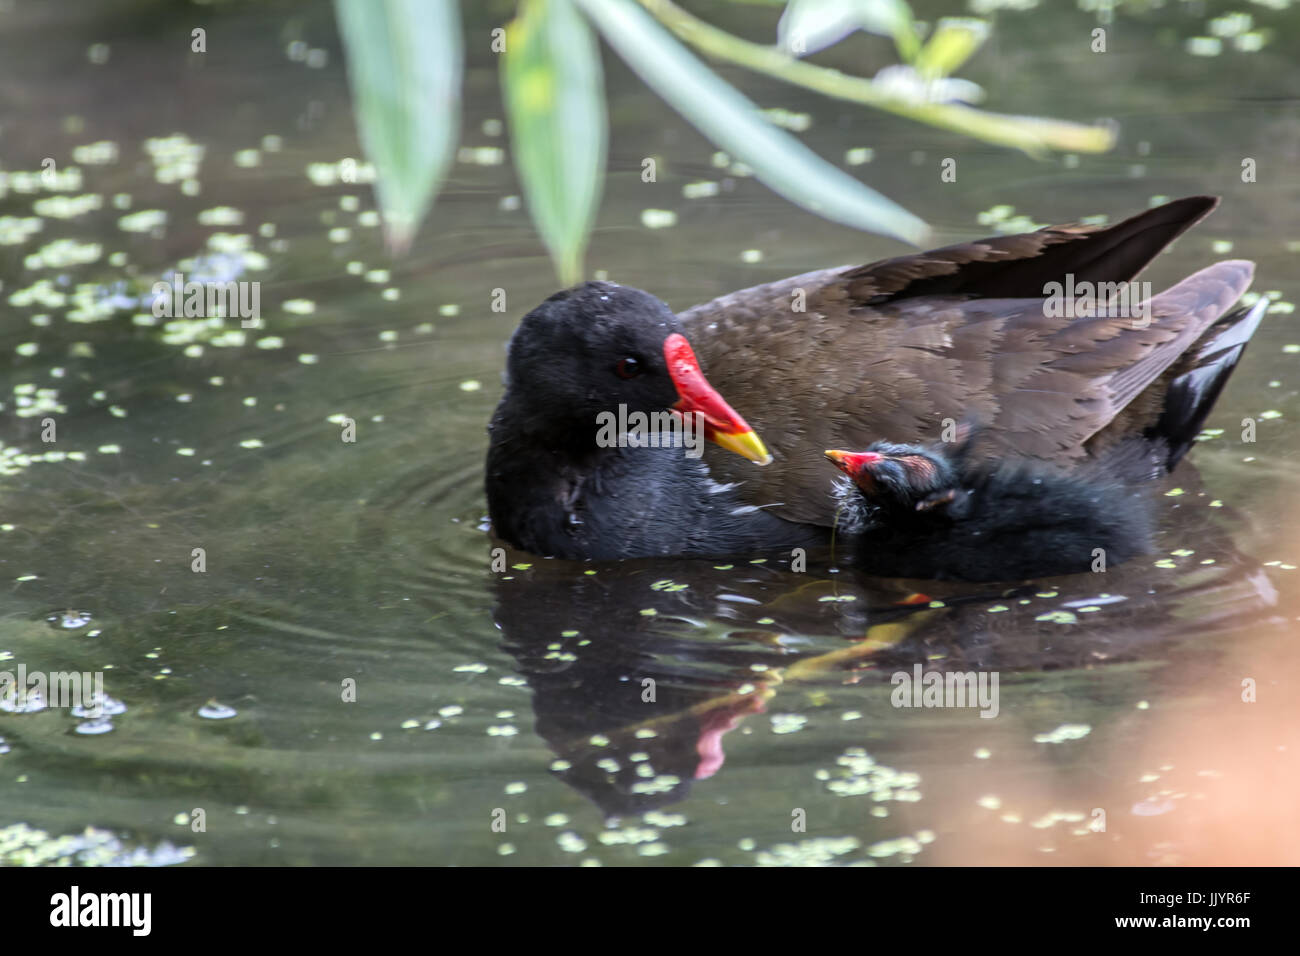 Melton Mowbray 21st July 2017: Baby Moorhens young Mallard ducks wetland wildlife town center pond on a dull grey day with sunney spells and rain. Clifford Norton/Alamy Live Credit: Clifford Norton/Alamy Live News Stock Photo